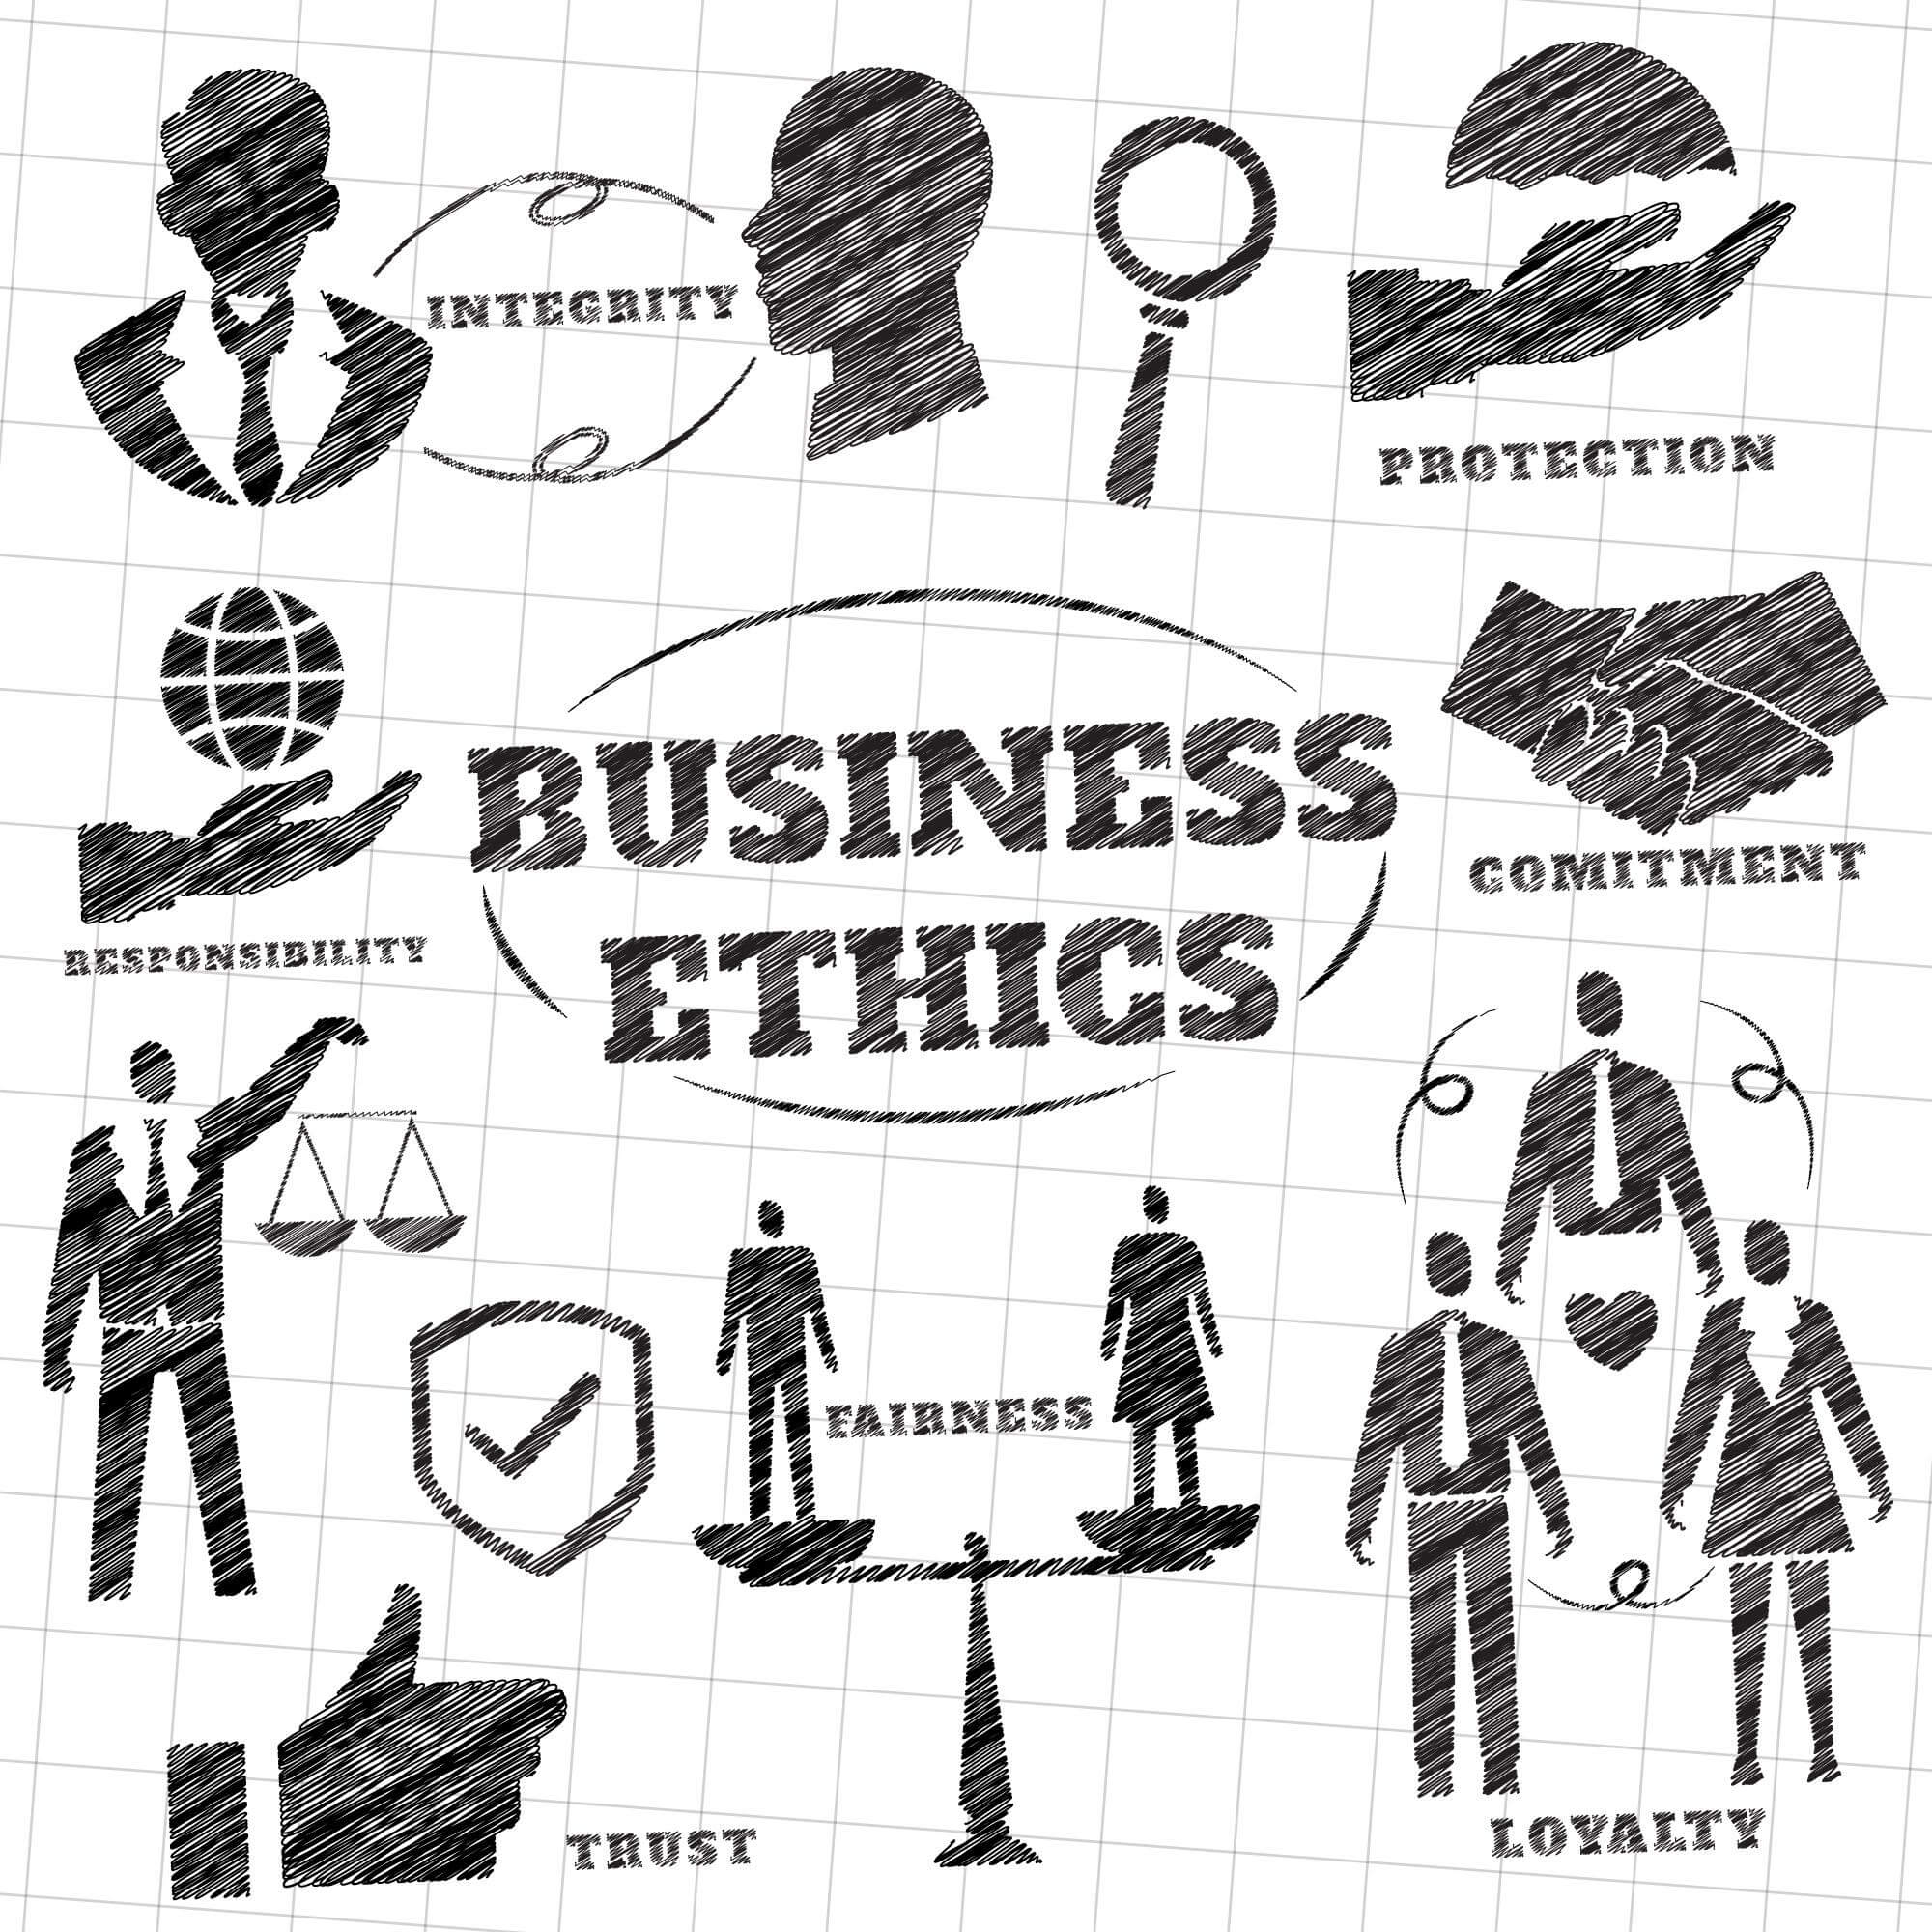 10 Myths About Business Ethics